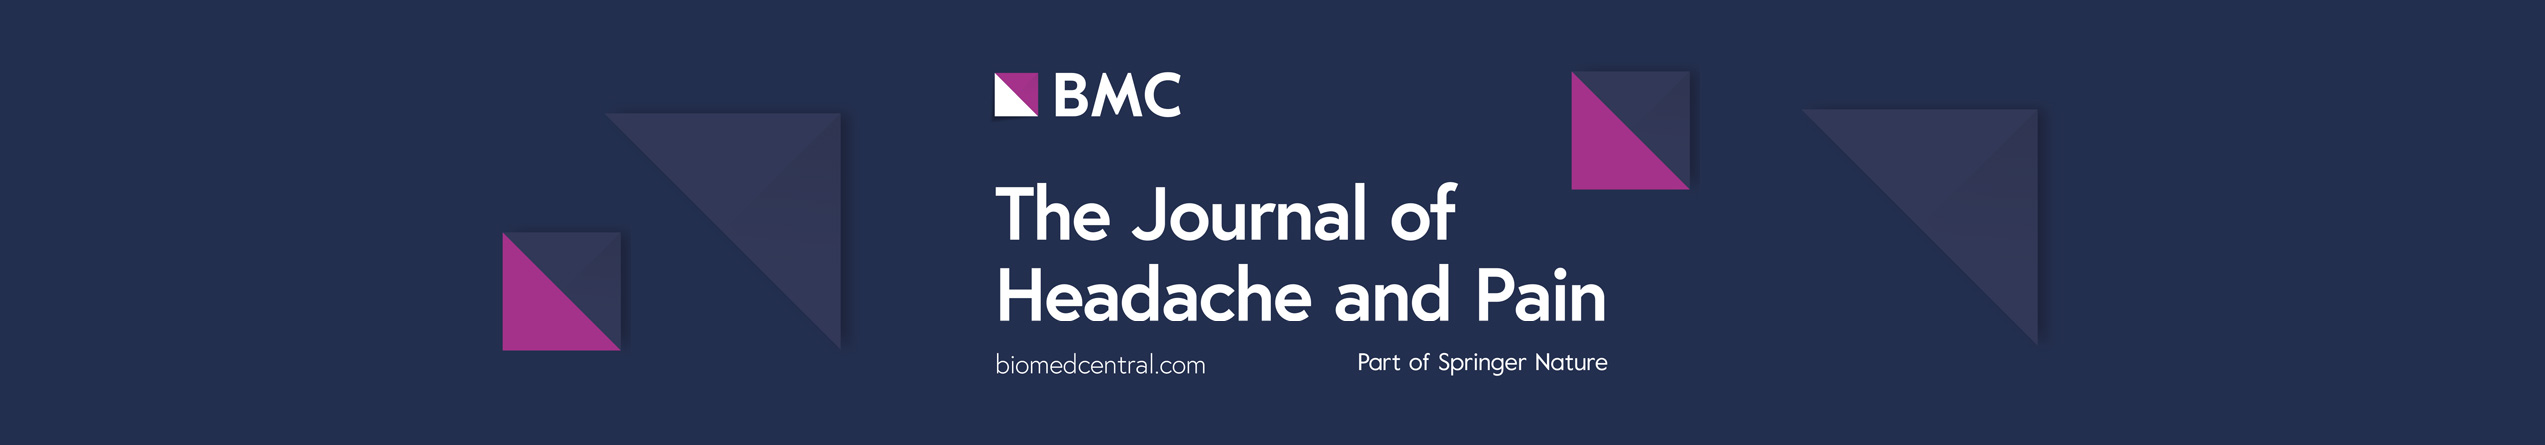 the-journal-of-headache-and-pain-slider